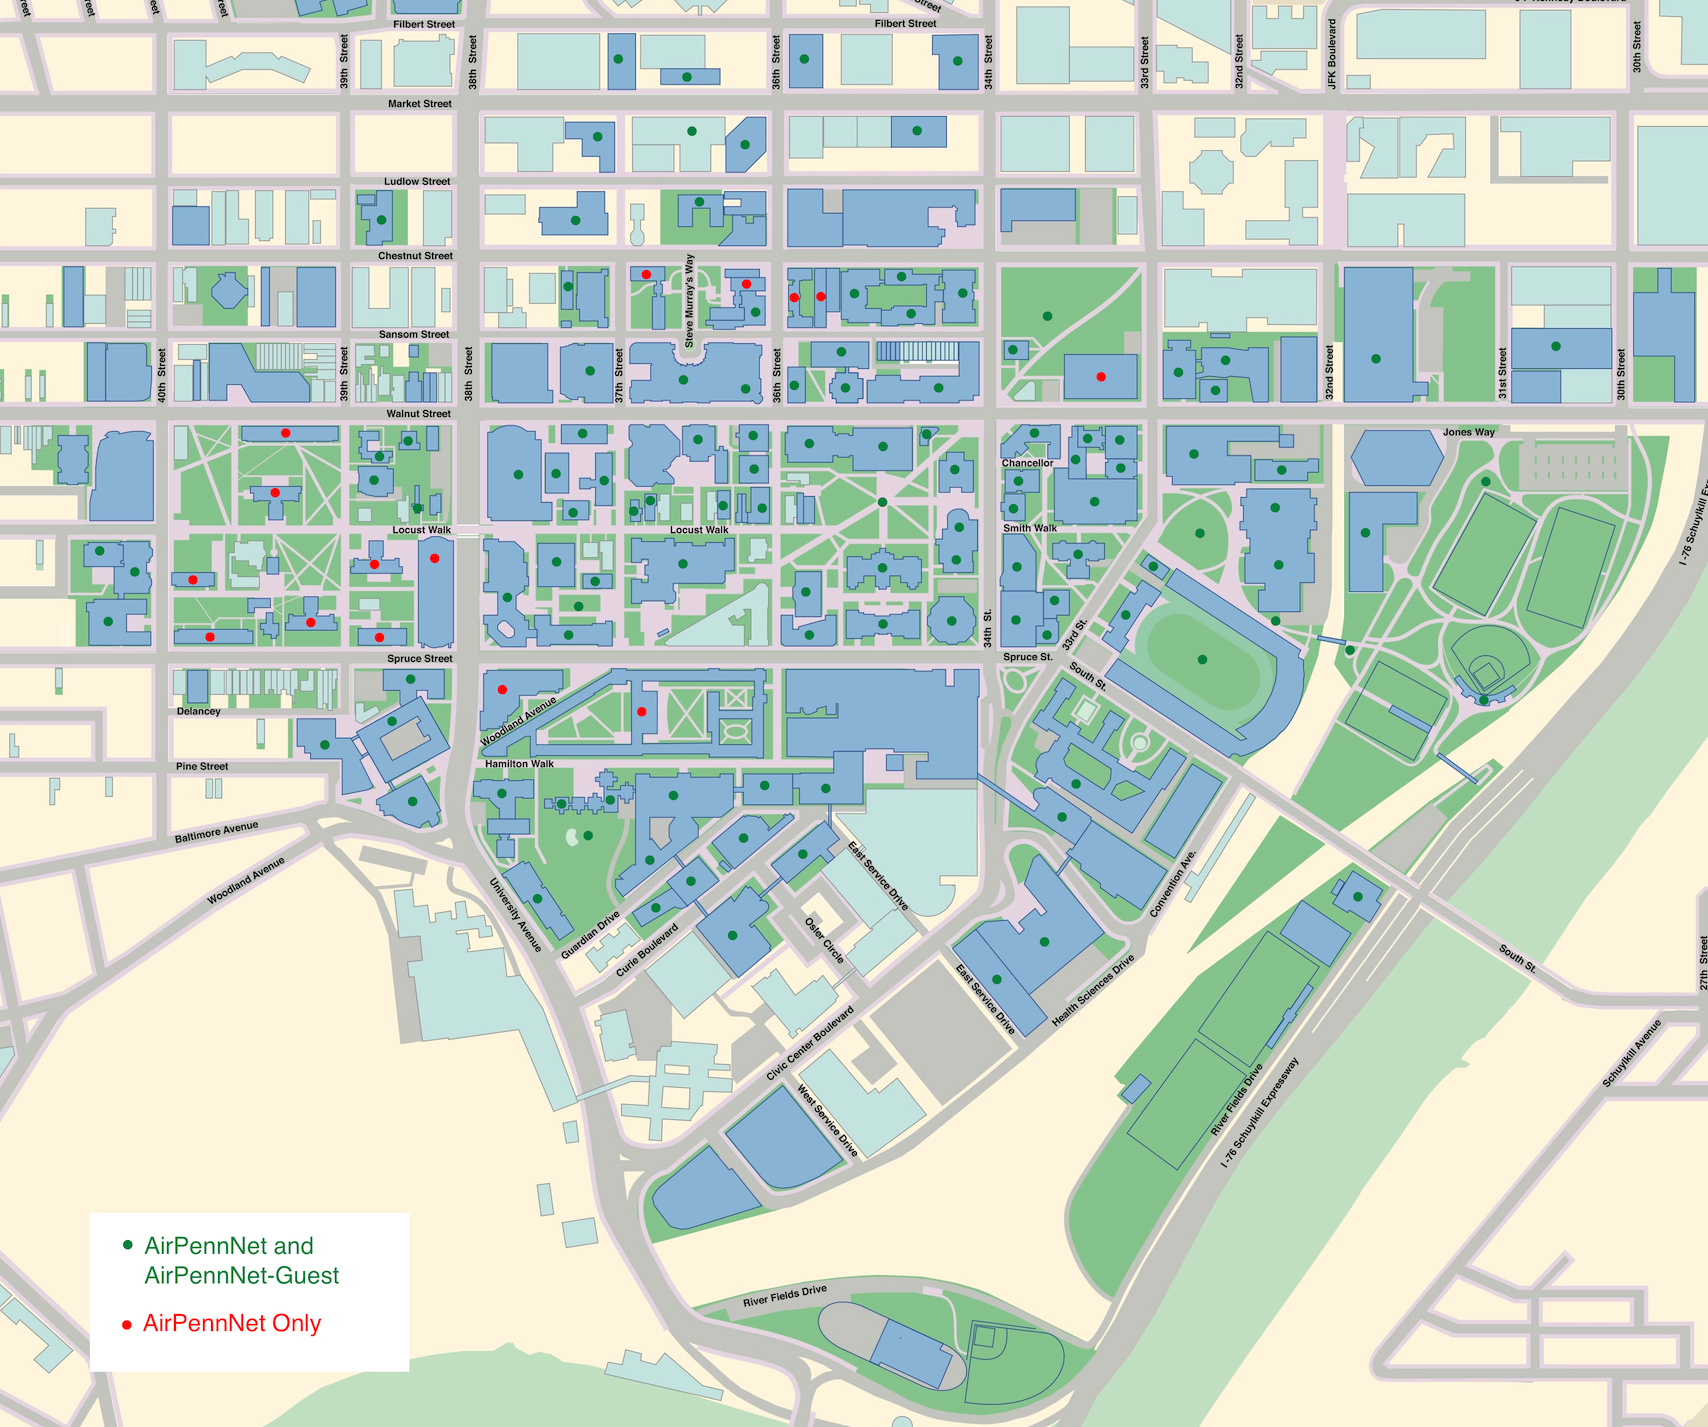 Map of Upenn Campus with AirPennNet and AirPennNet Guest access as green dots, AirPennNet Only access red dots.